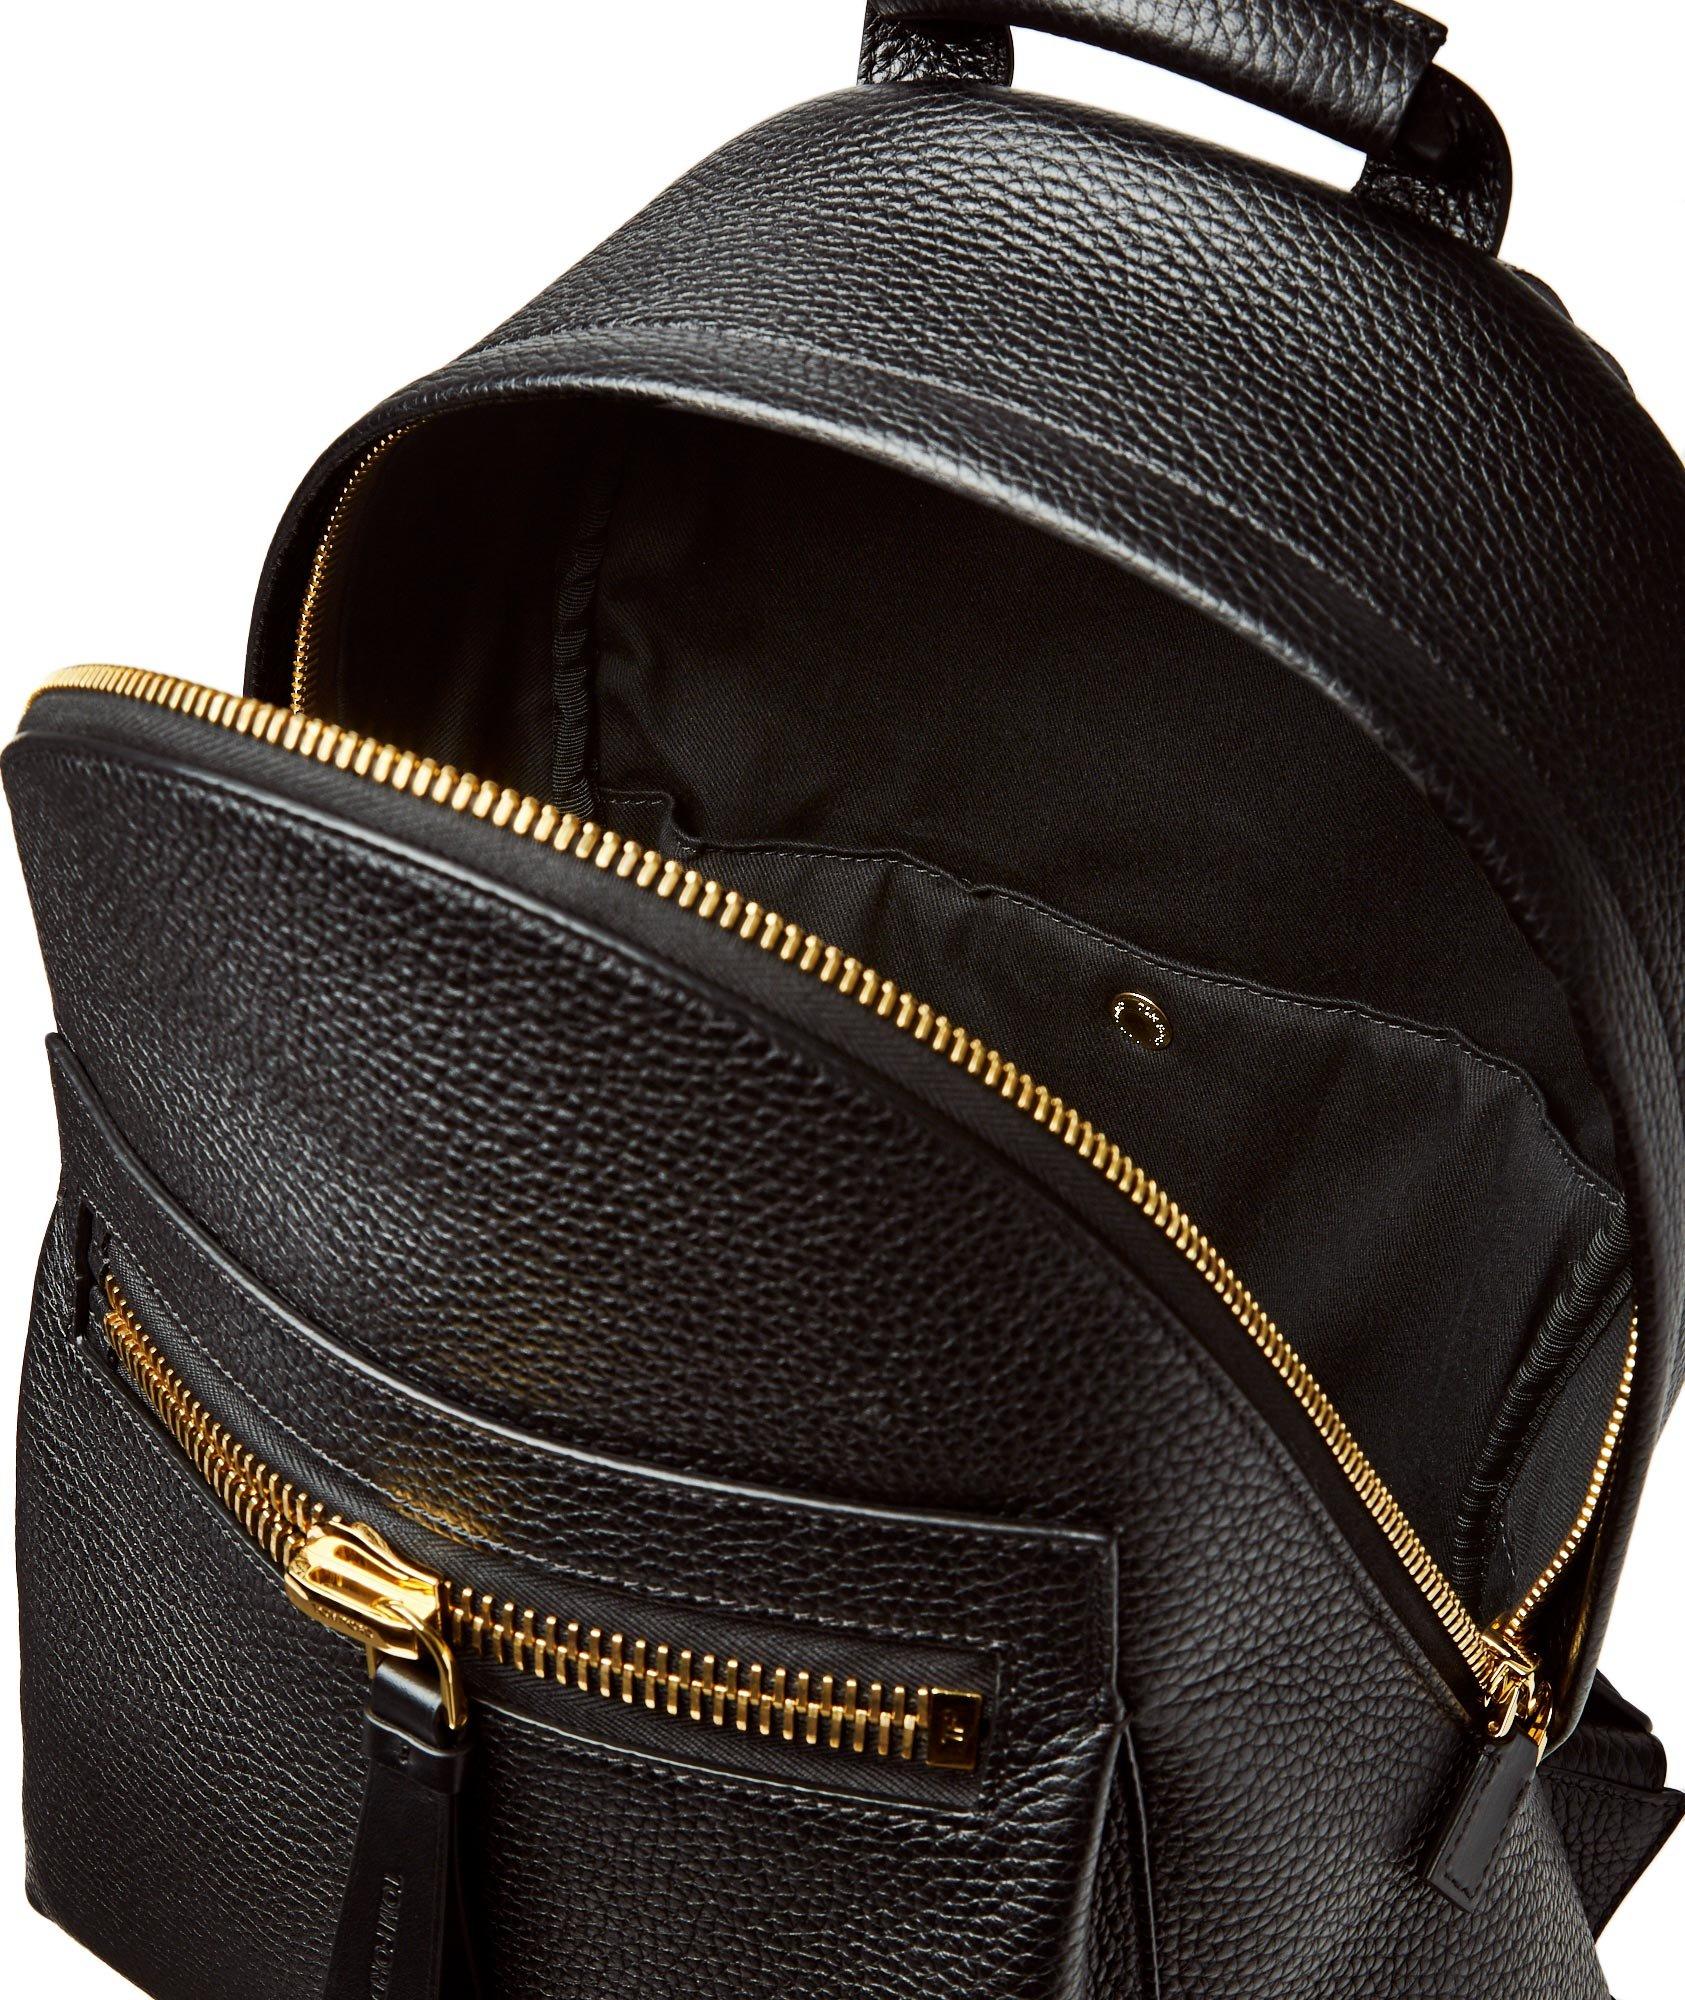 Buckley Leather Backpack image 2